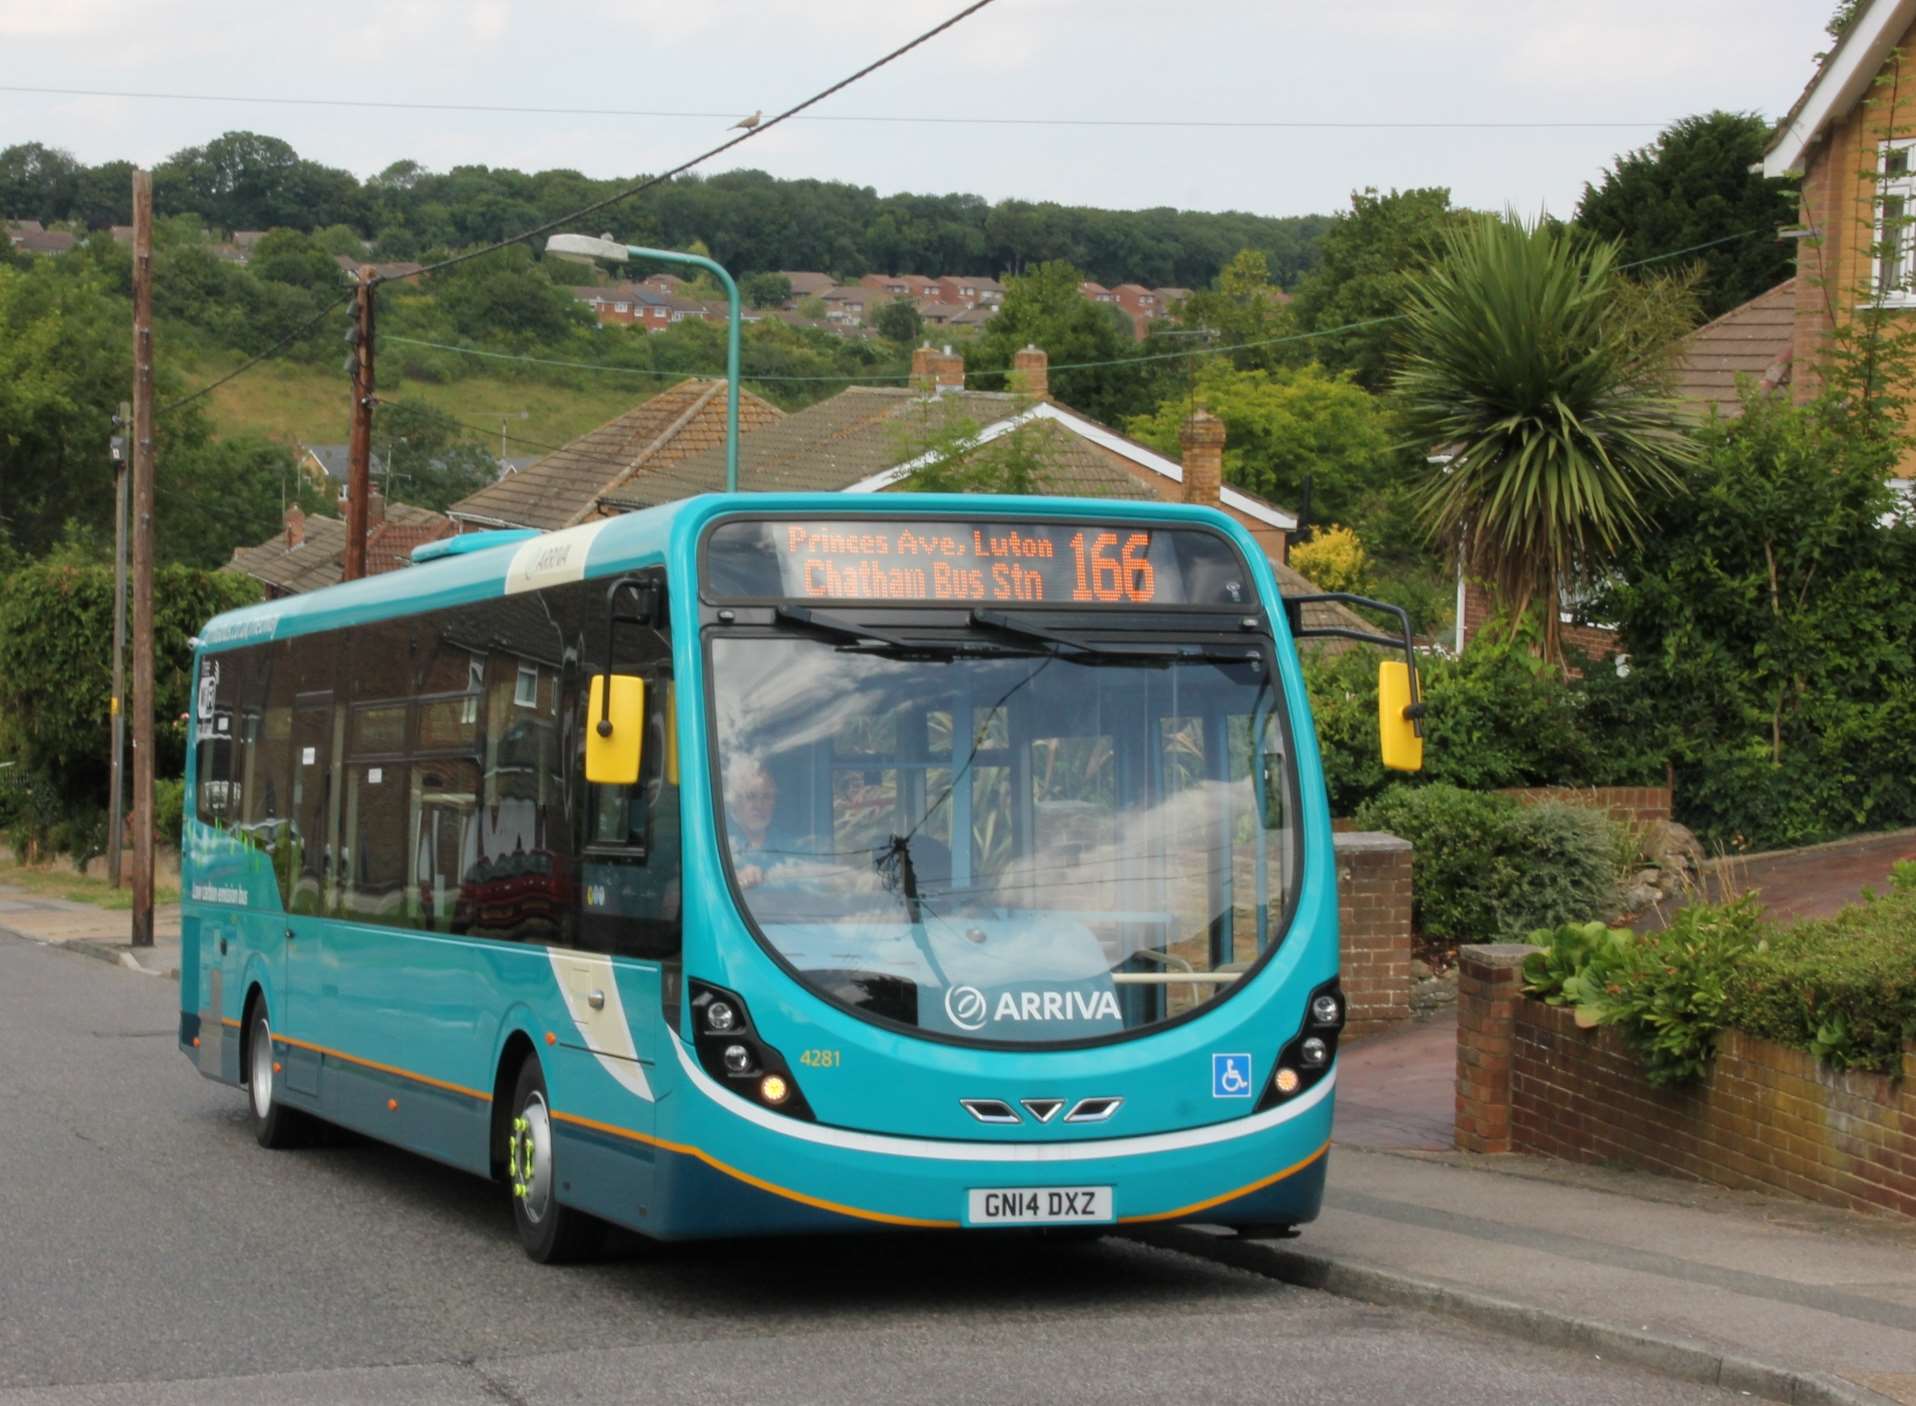 Arriva has invested £1.7 million in eco-friendly buses in and around Medway